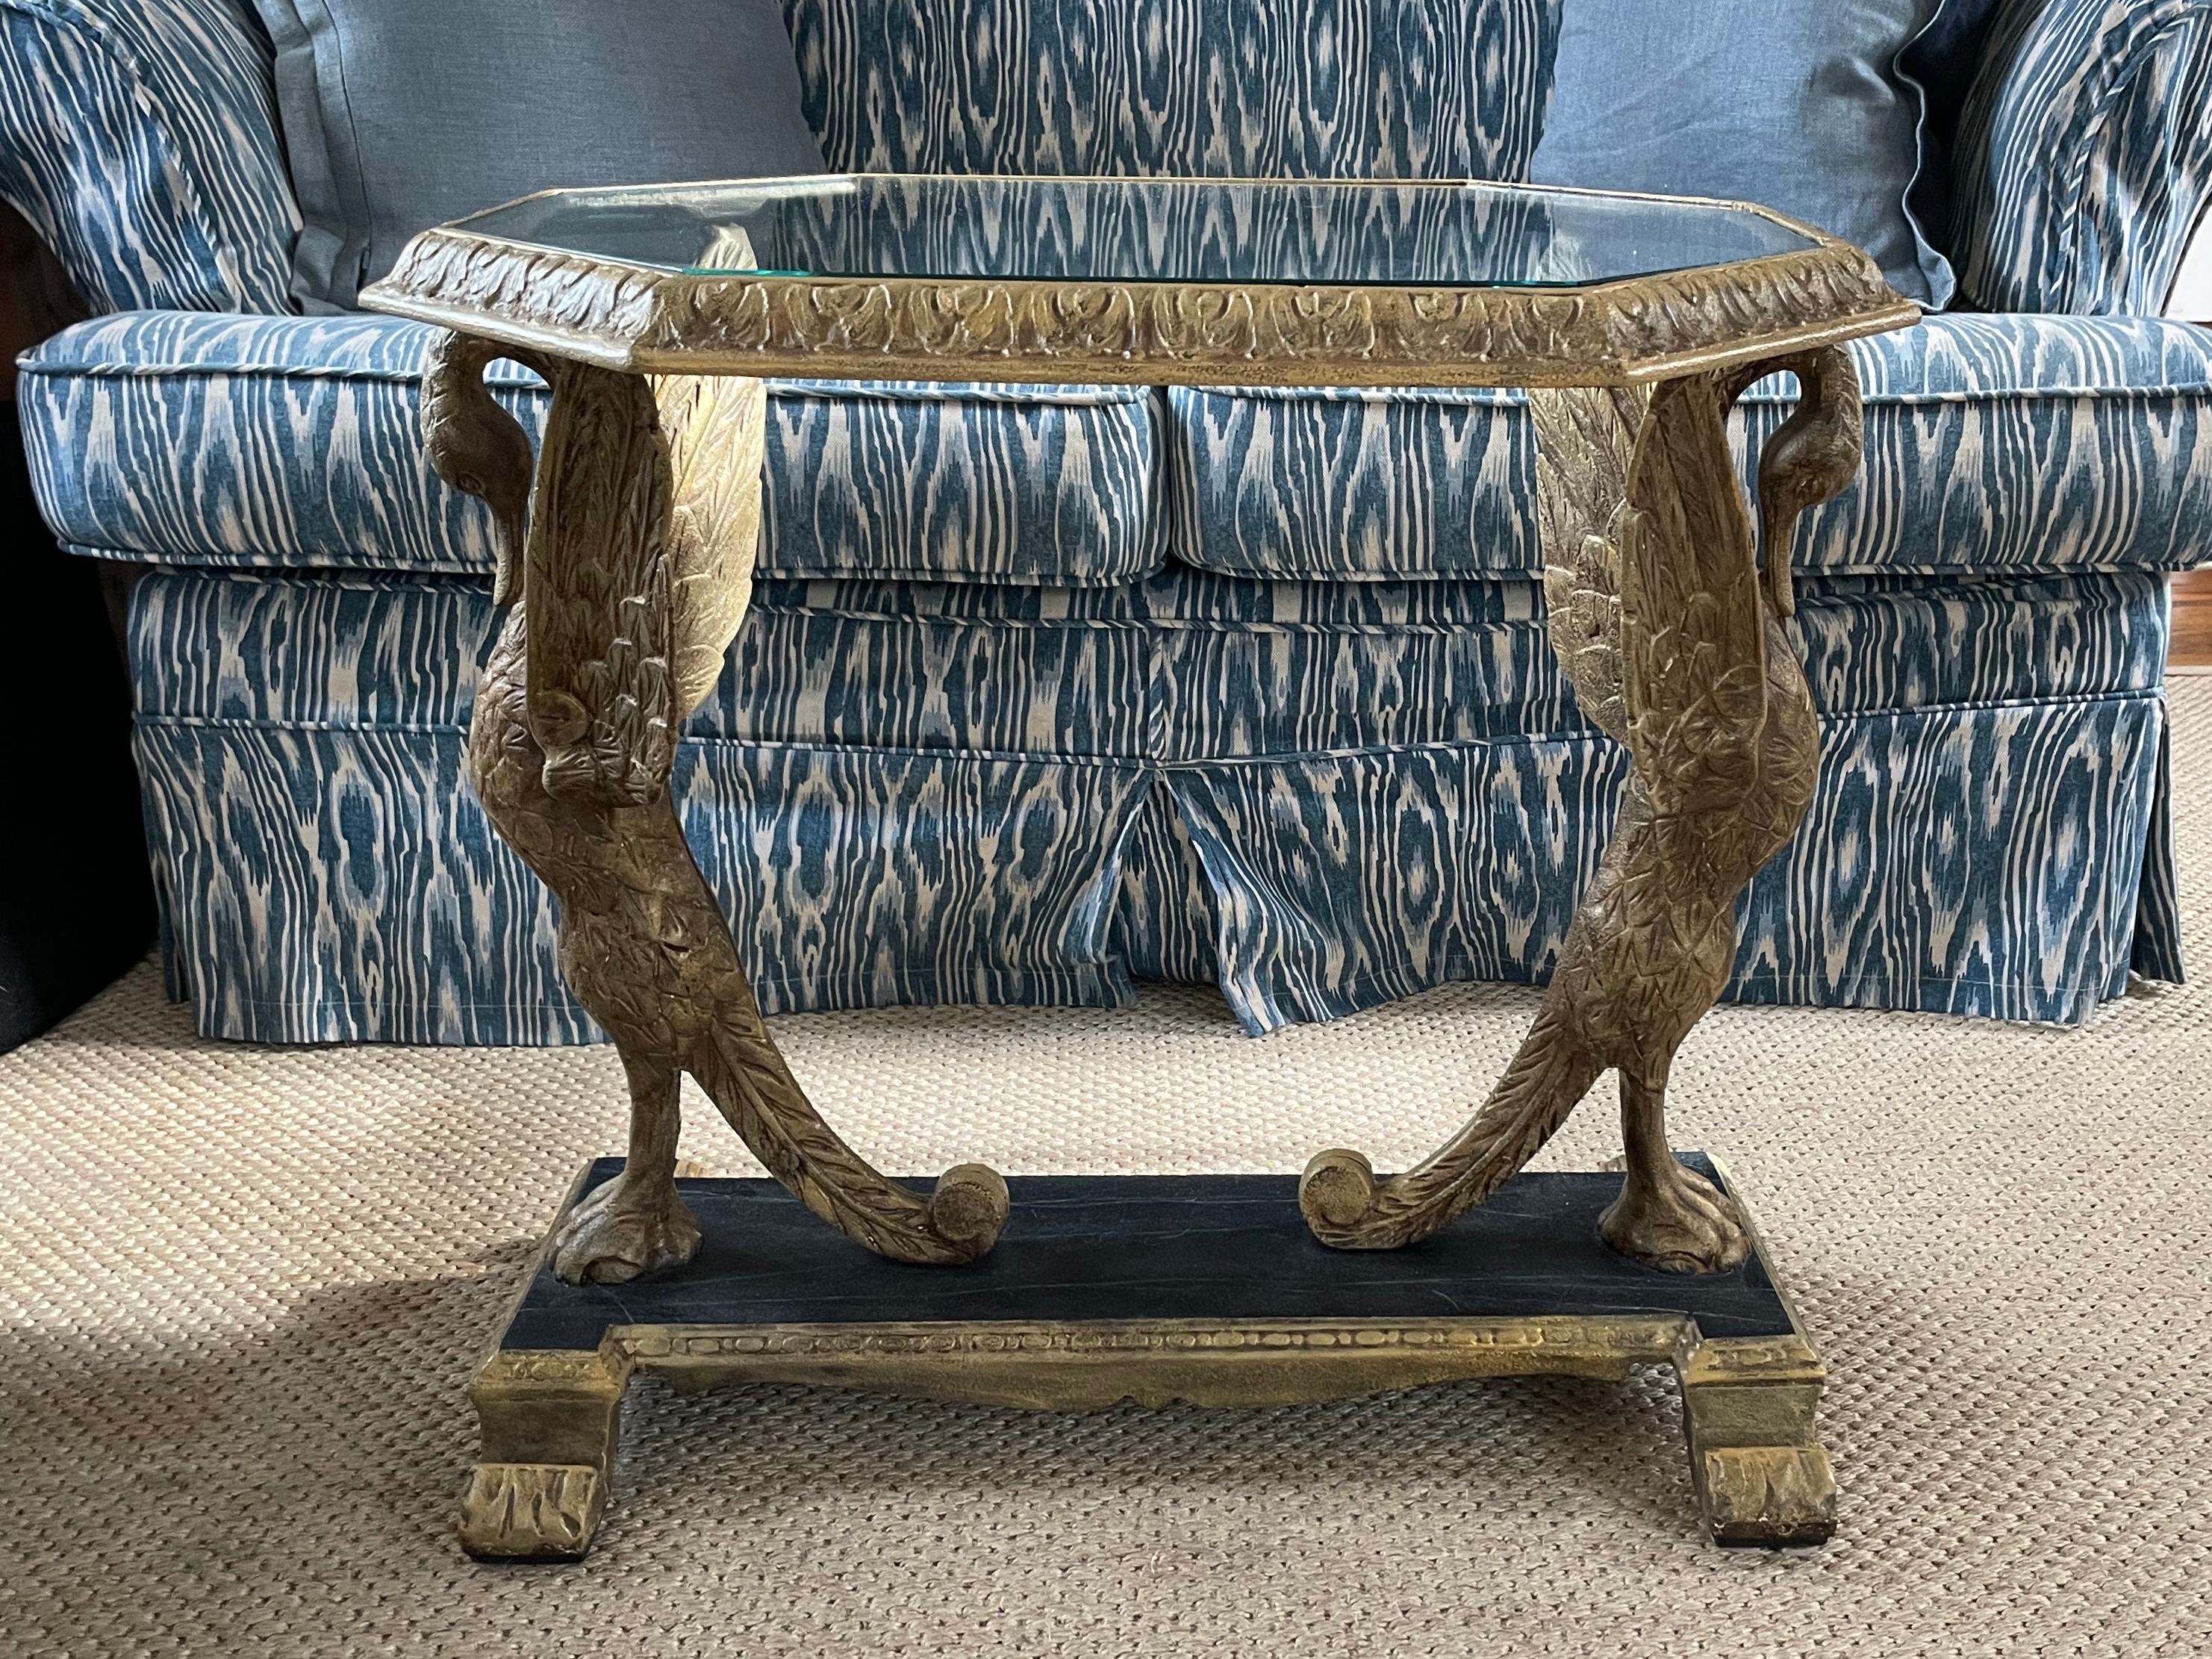 Neoclassical Gilt iron swan table. Antique neoclassical style cast iron side table/tea table of oblong octagonal form glass top framed by conforming acanthus leaf border supported by pair of swans with outstretched wings with webbed feet and outward